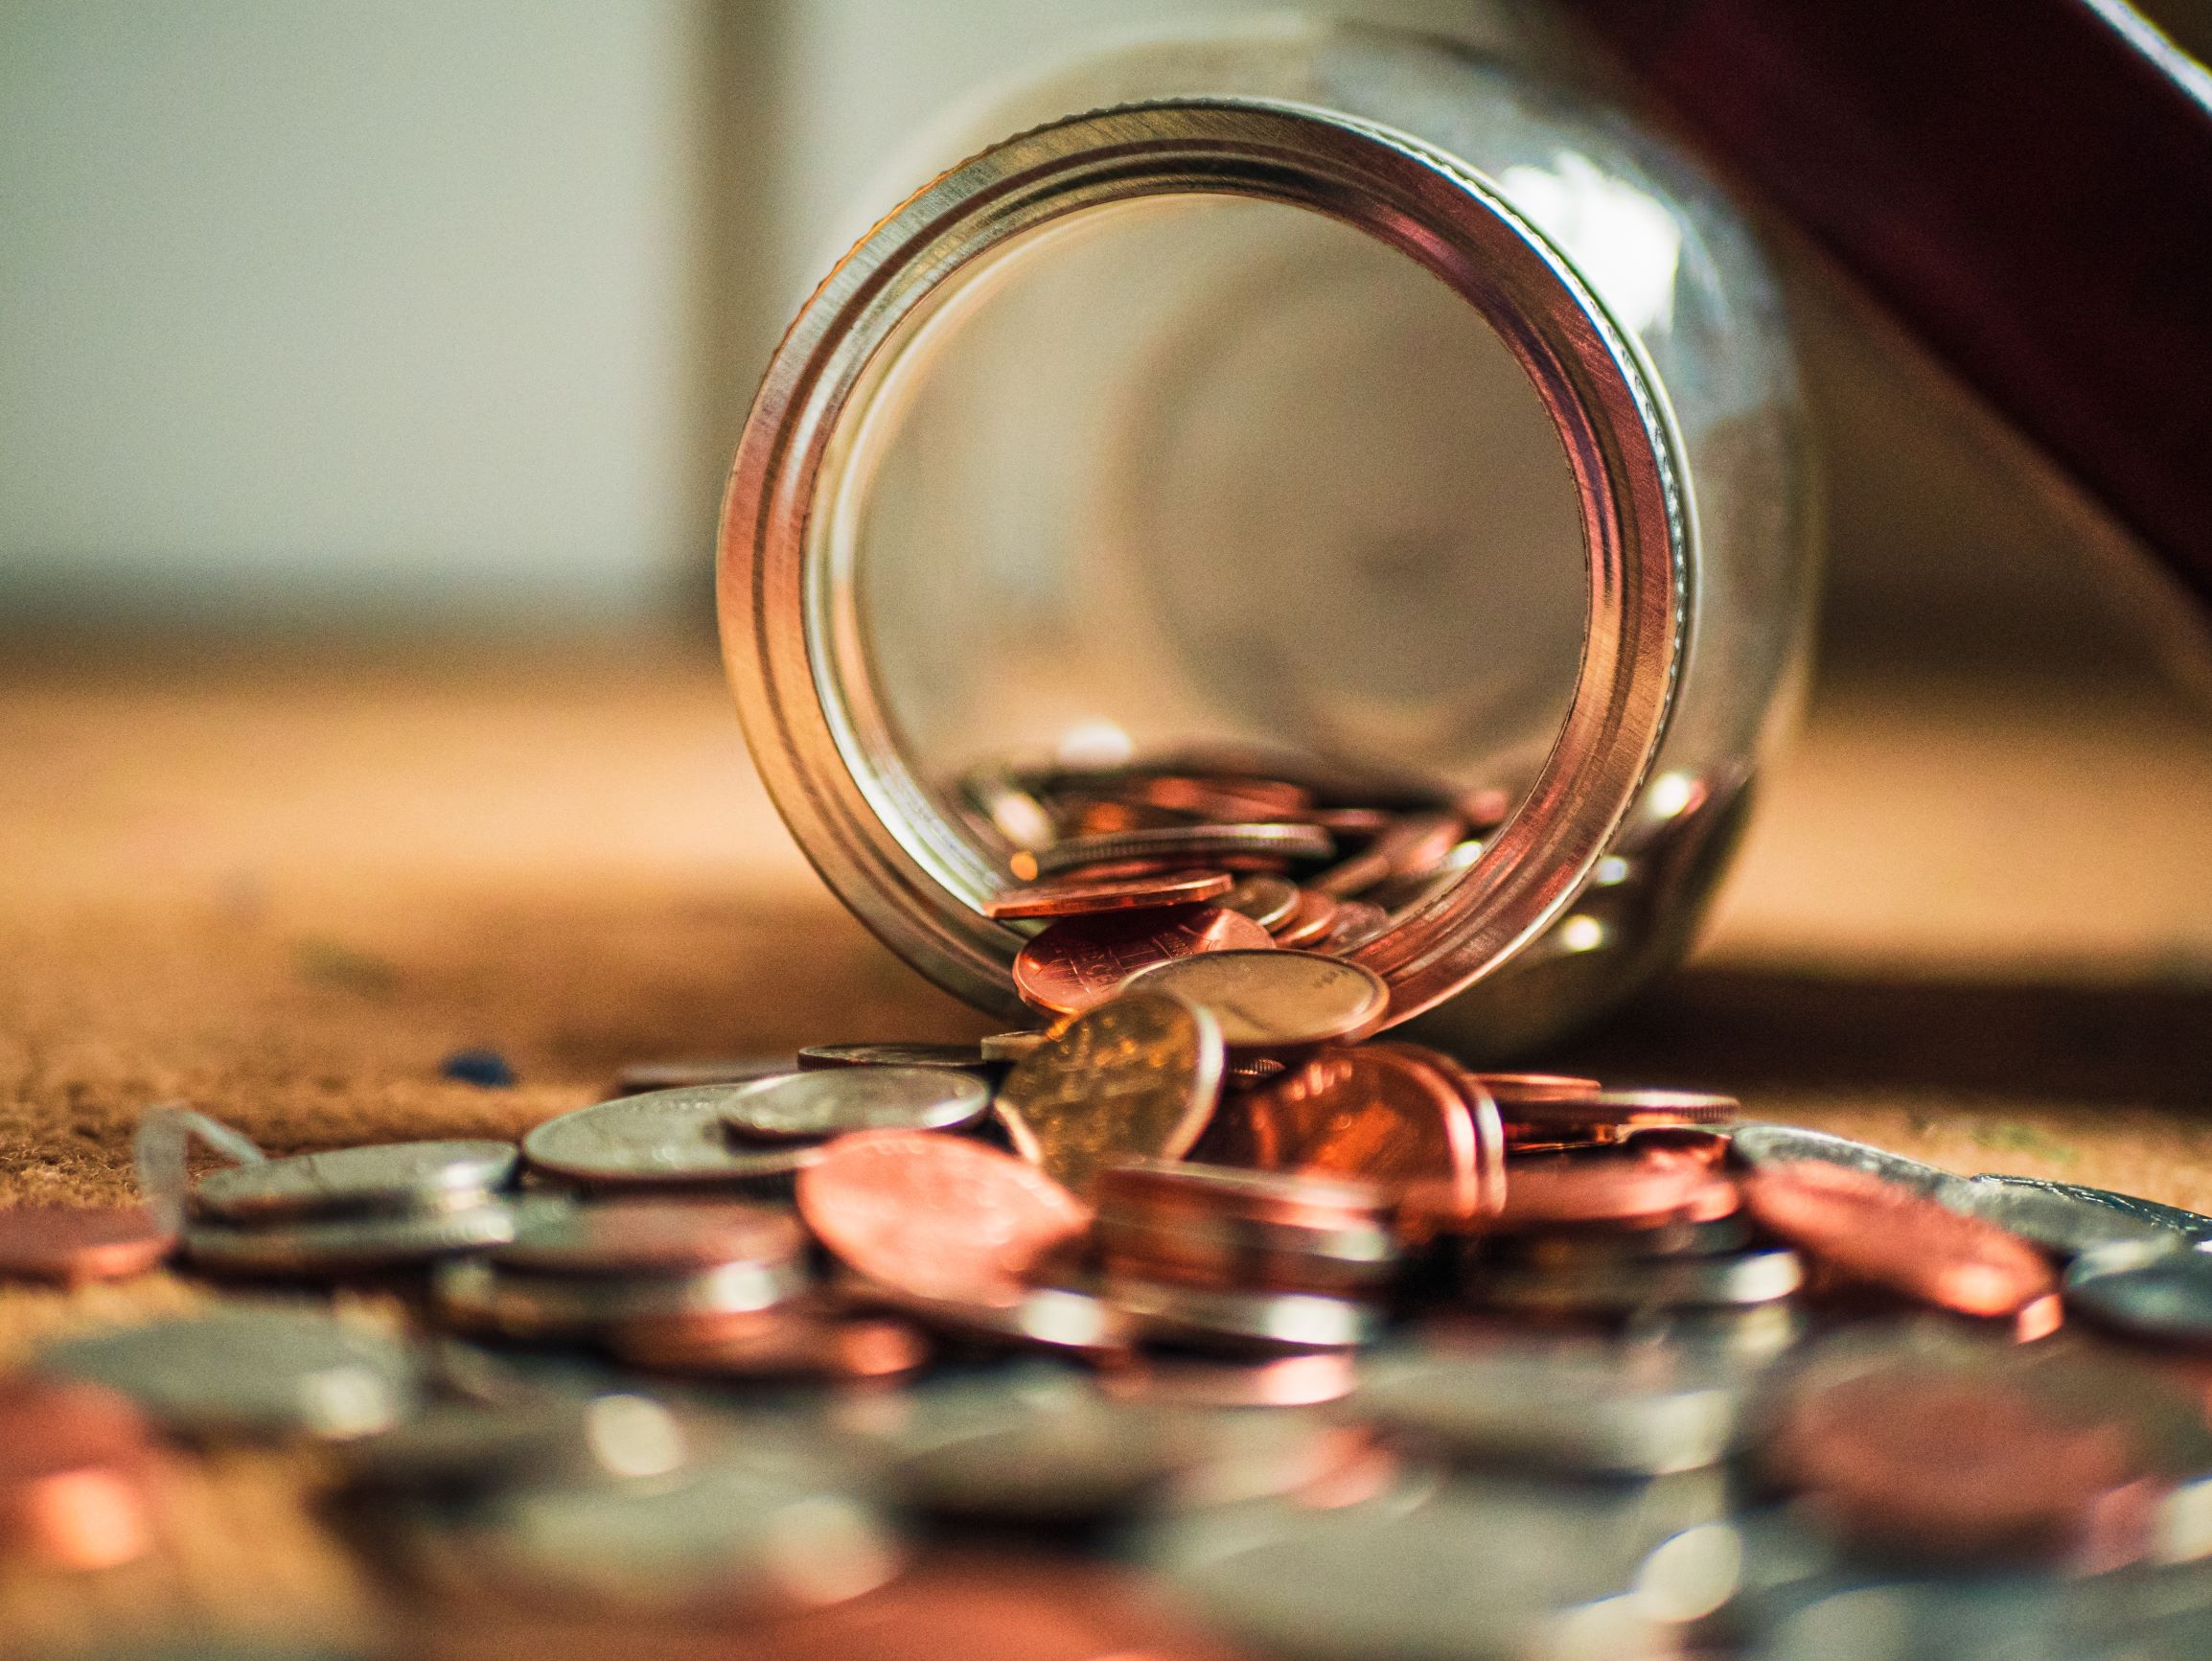 Pennies in a tipped jar. How has the Covid-19 pandemic affected credit management?